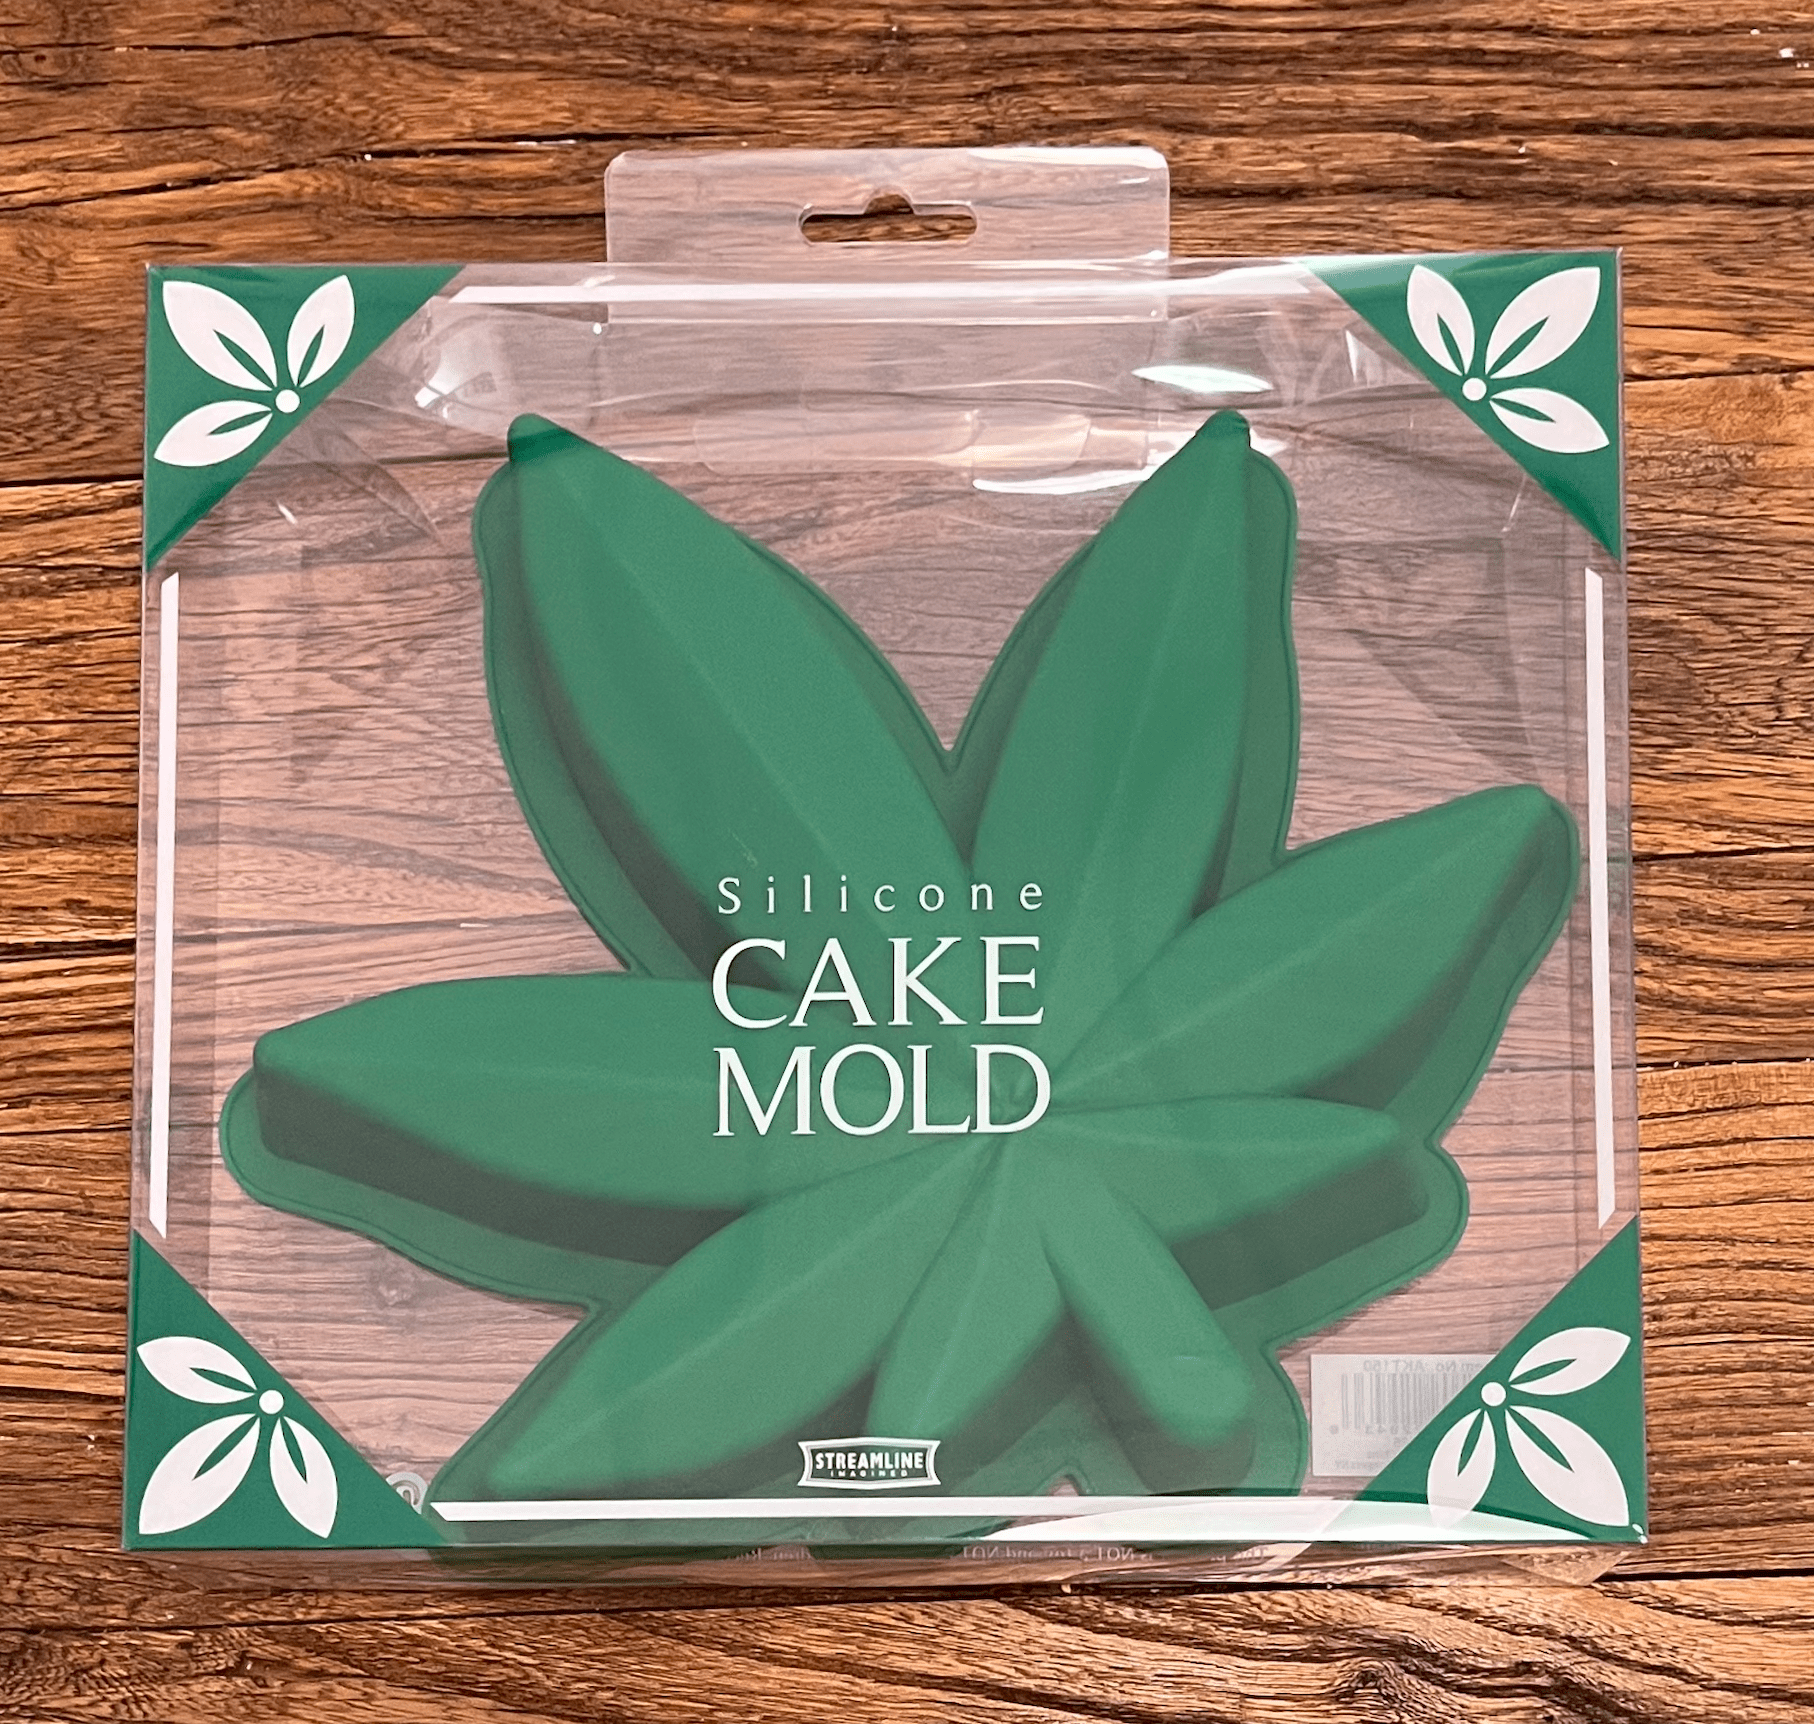 Weed Edible Silicone Leaf Cannabis Chocolate Mold and Chocolate bar  breakable Mold, Gummy, Marijuana Pot, For Muffins Cookie Chocolate Fondant  Greenery Candy Hemp 2 Different Molds : Amazon.in: Home & Kitchen